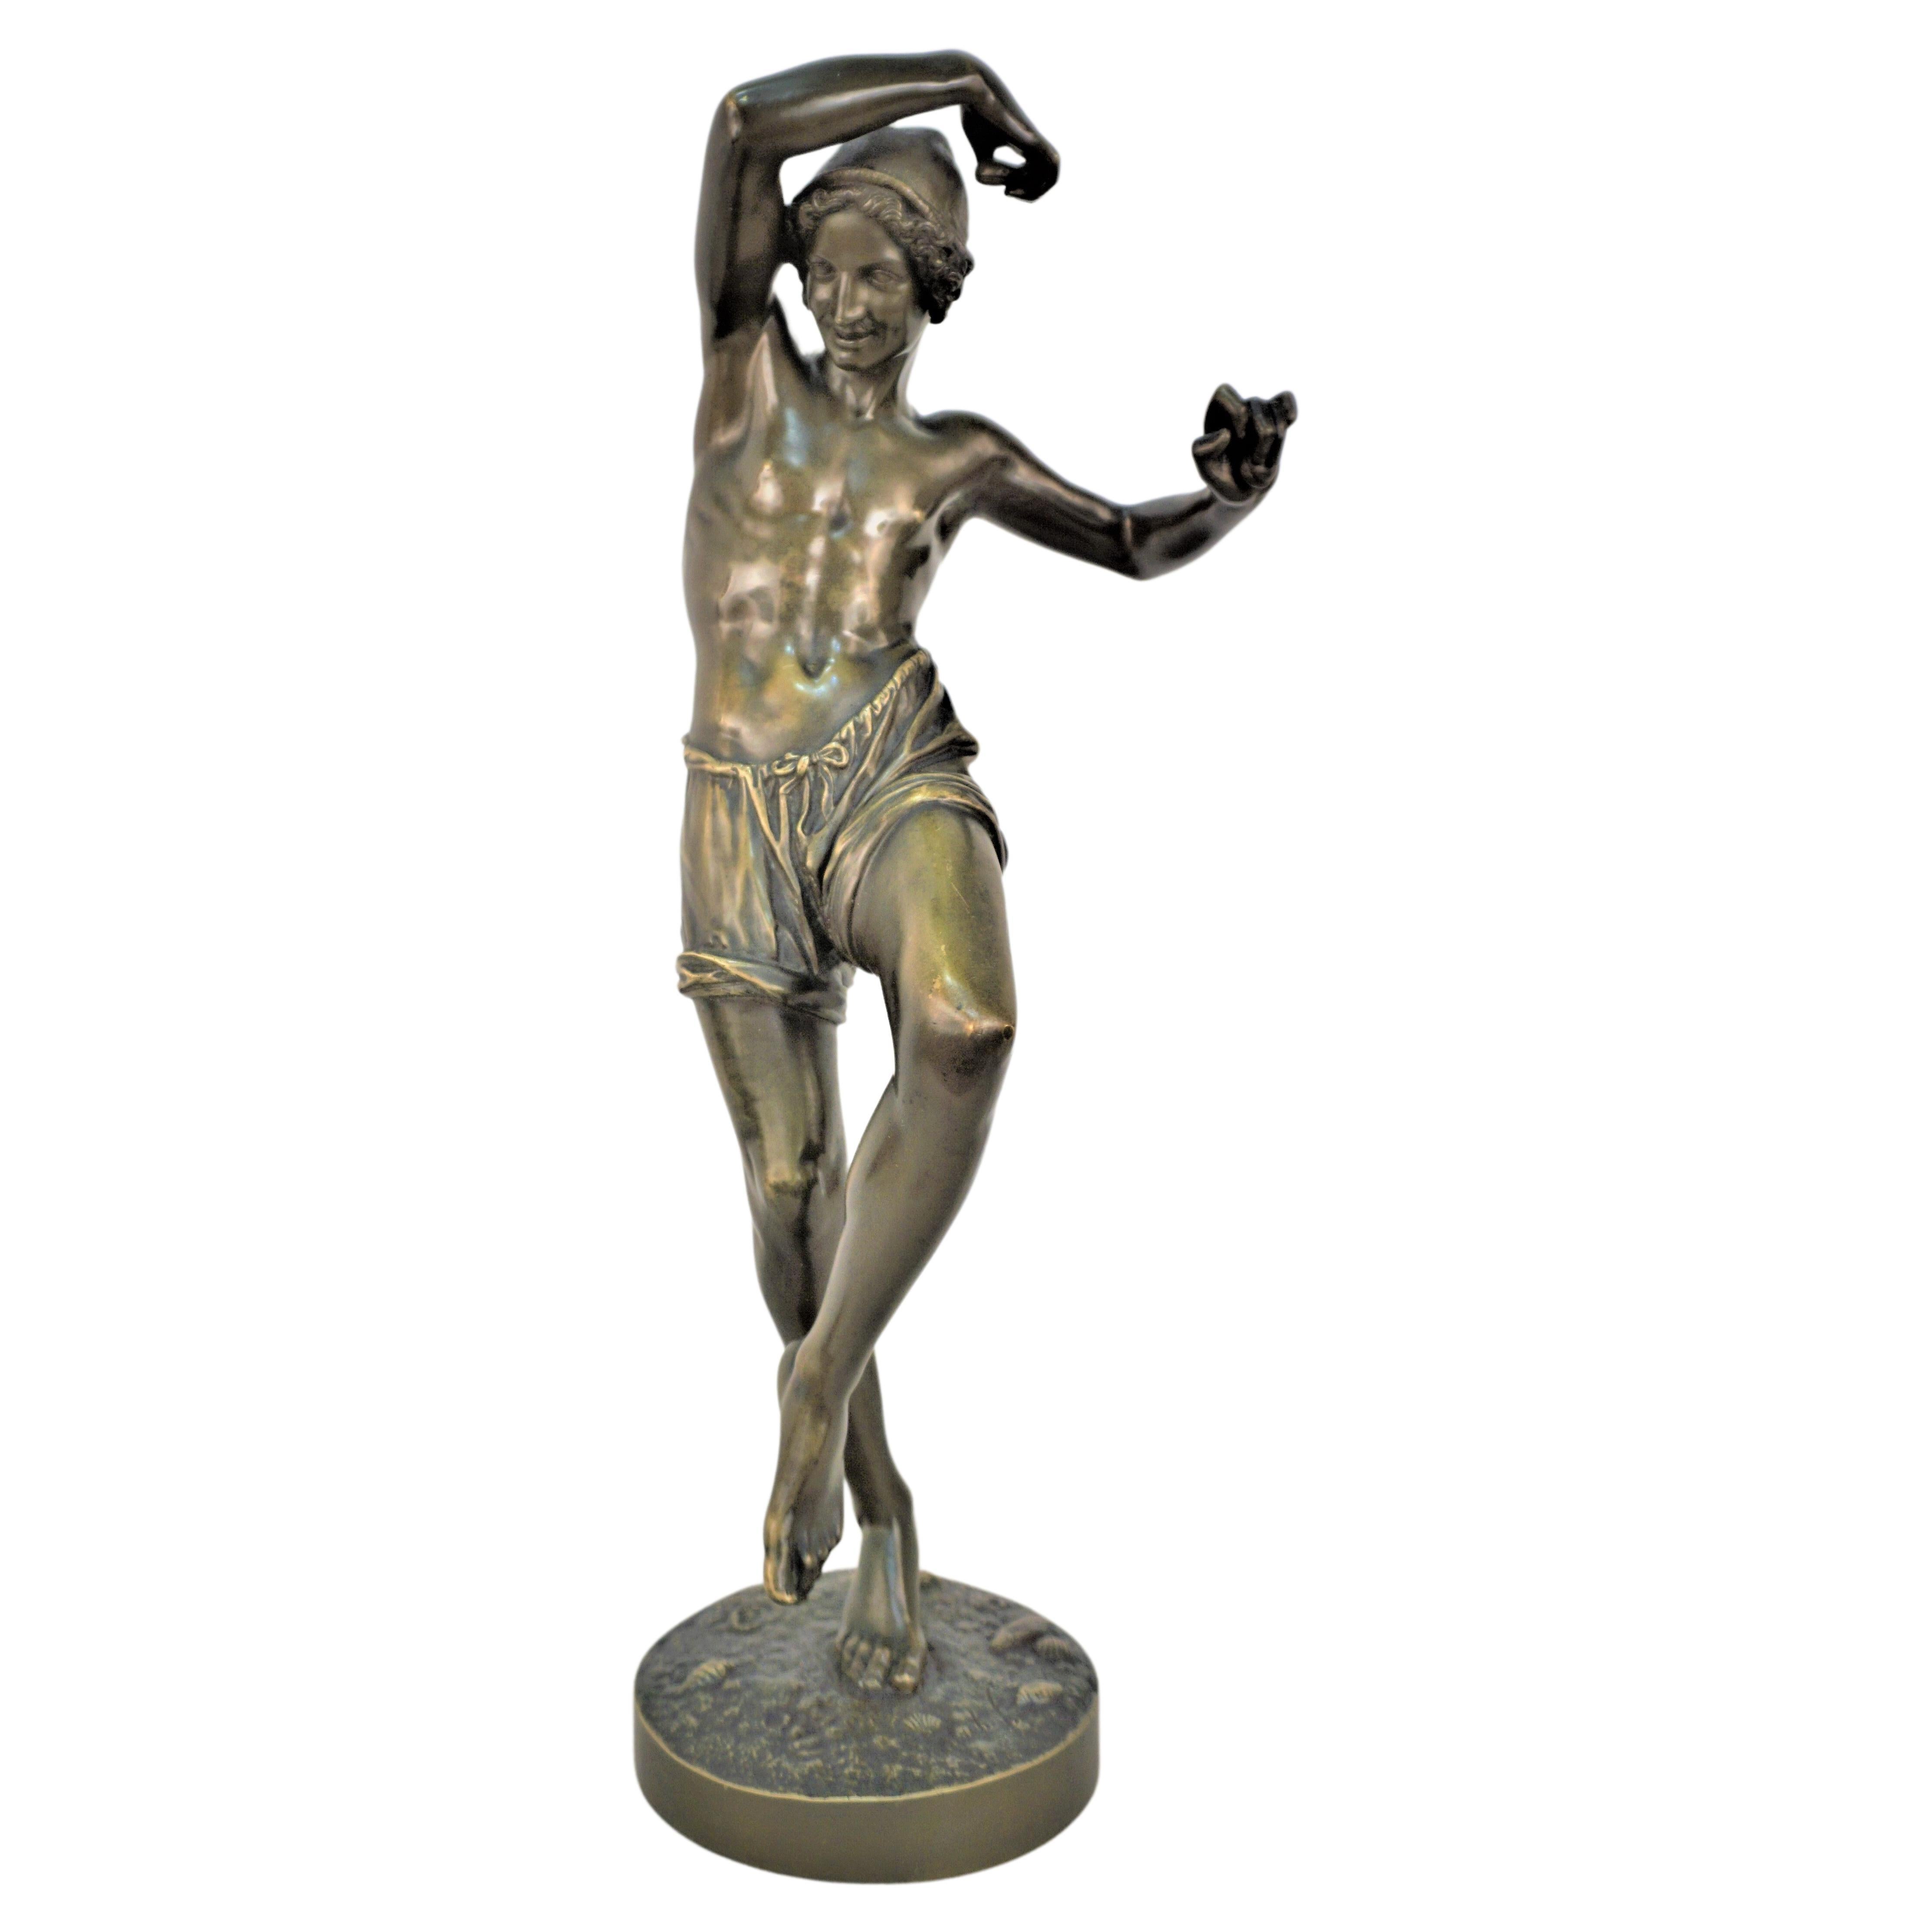 French Bronze Figure of a Neapolitan Dancer with Castanets